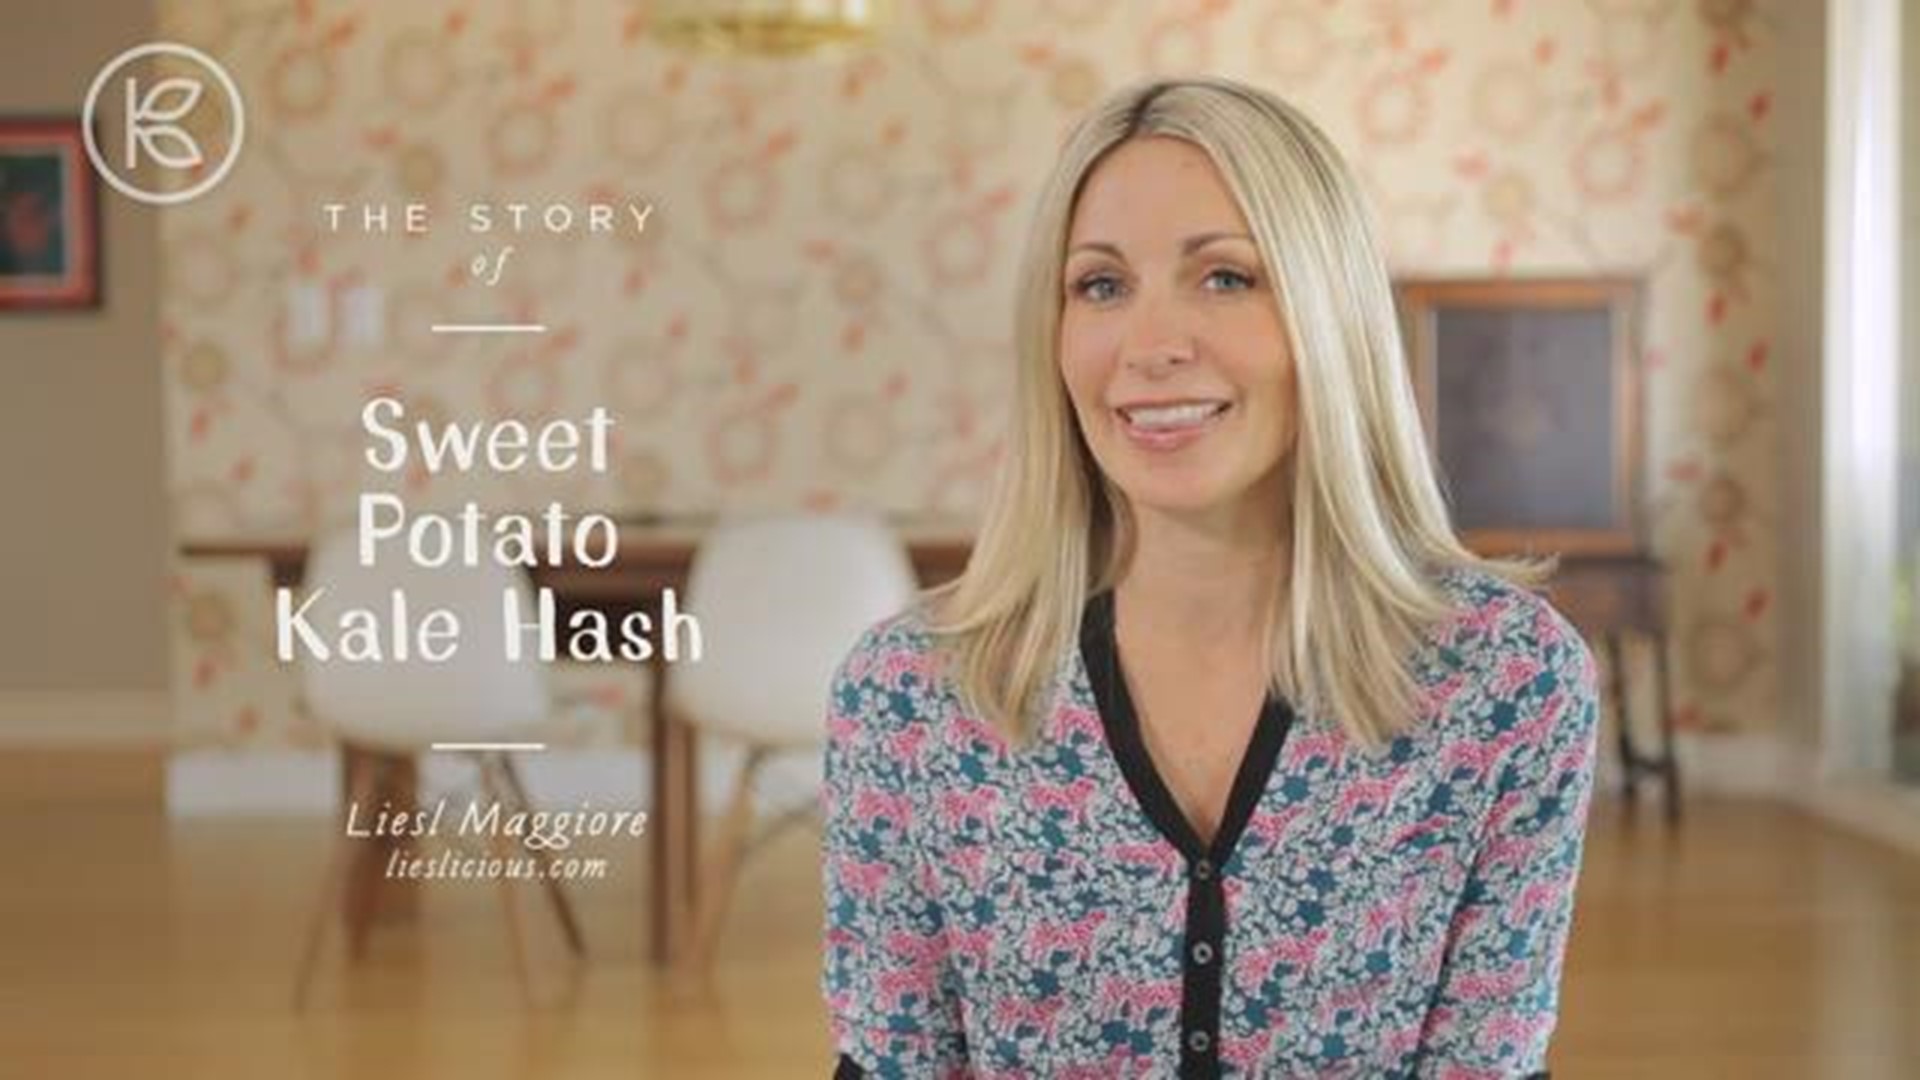 Here is another great receipe from Liesl. In this video tutorial Liesl makes Sweet Potato & Kale Hash.